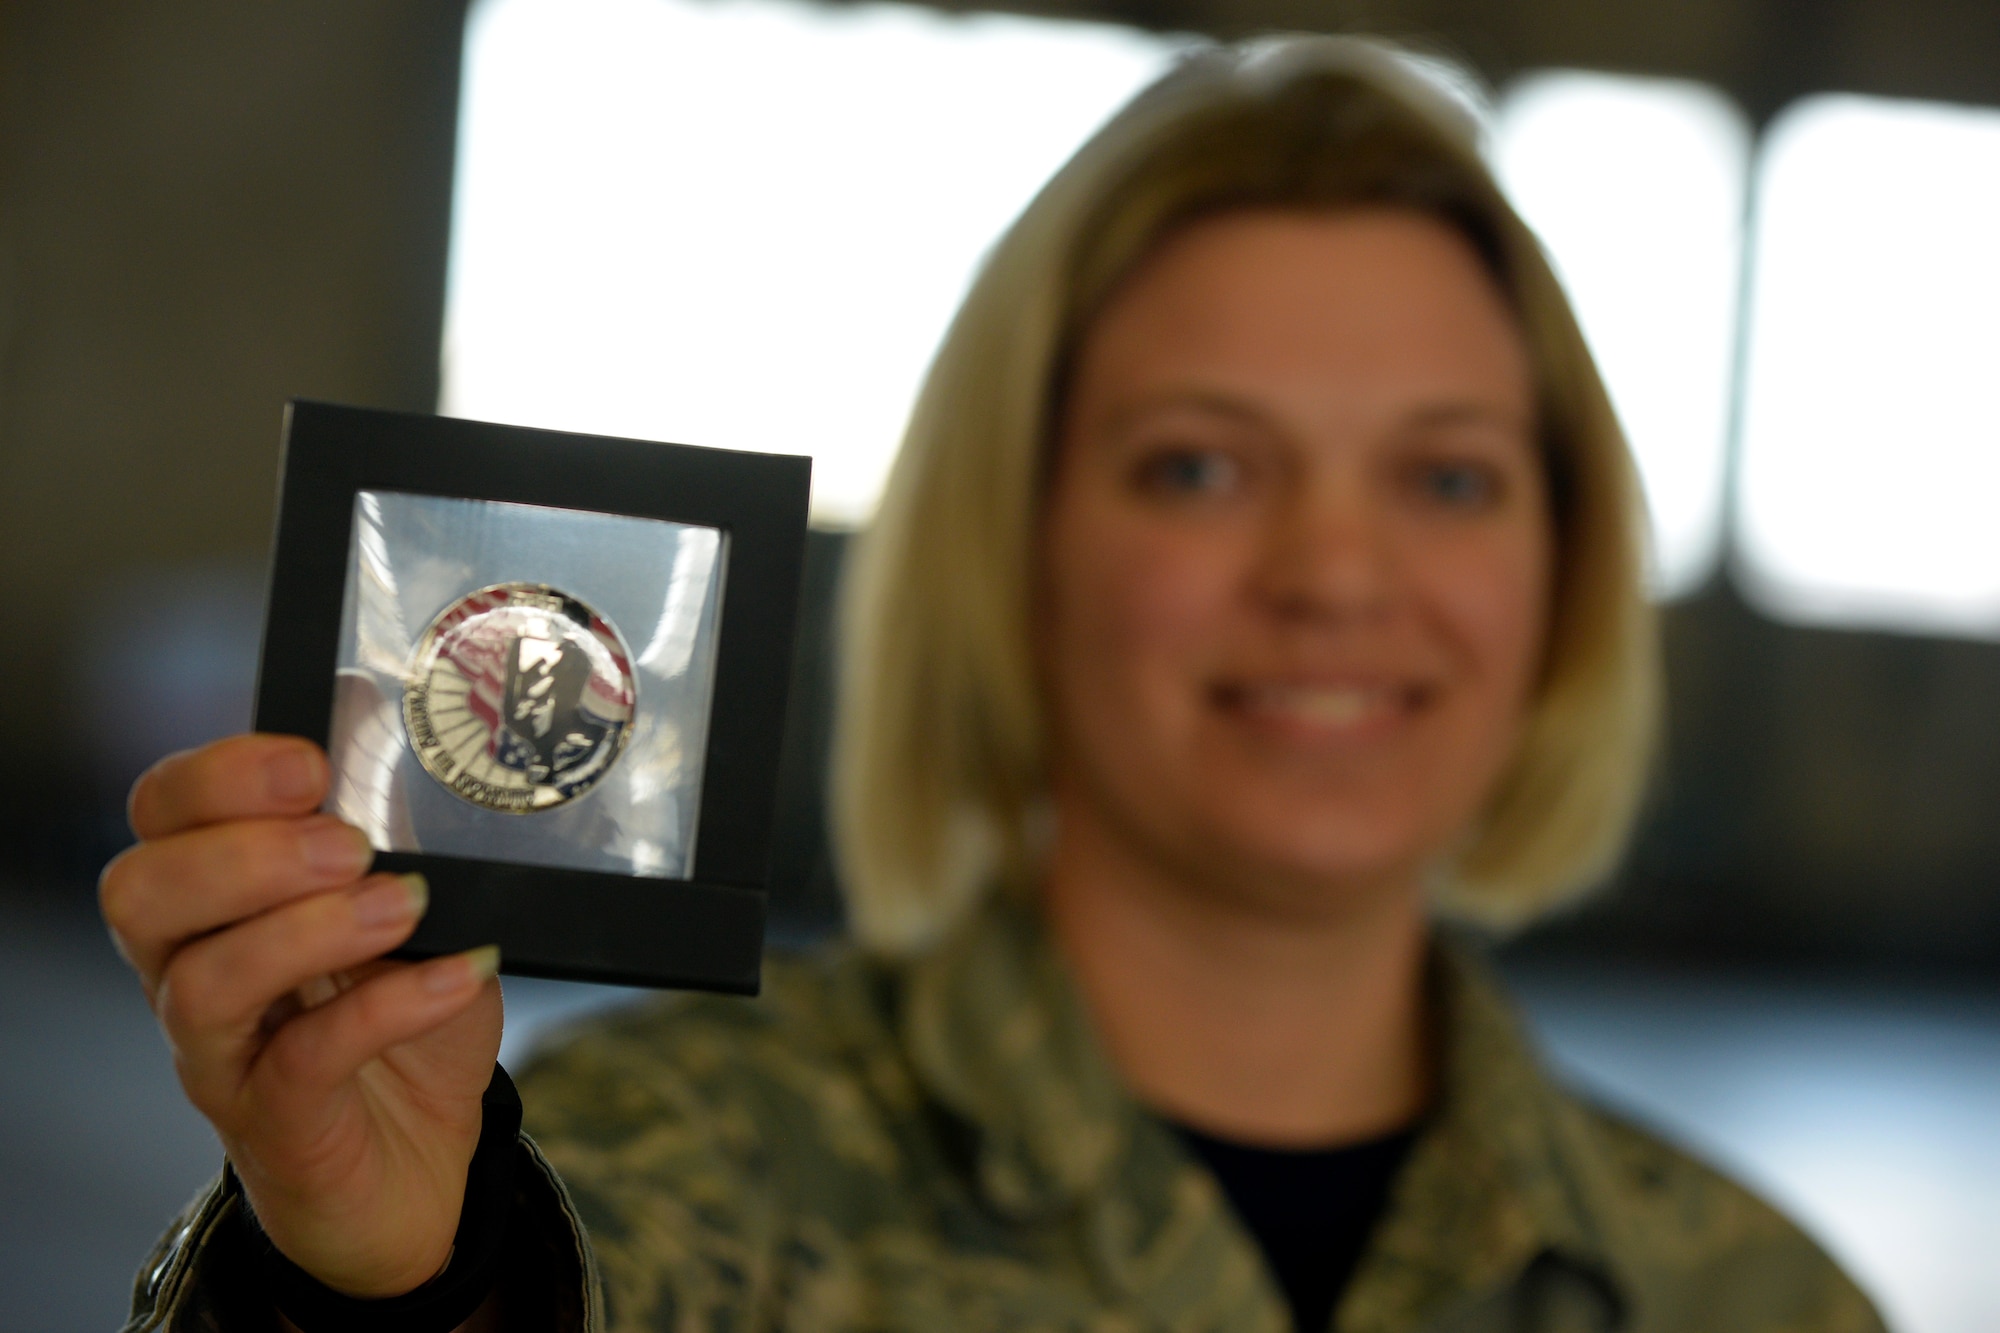 U.S. Air Force Master Sgt. Kristin Bandy, with the 121st Medical Squadron, shows off her Airman-to-Airman coin during the 121st Air Refueling Wing awards ceremony April 2, 2017 at Rickenbacker Air National Guard Base, Ohio. Bandy received numbered coin 80 for her efforts in improving the Airmen’s experience in the medical clinic. (U.S. Air National Guard photo by Senior Master Sgt. Ralph Branson)